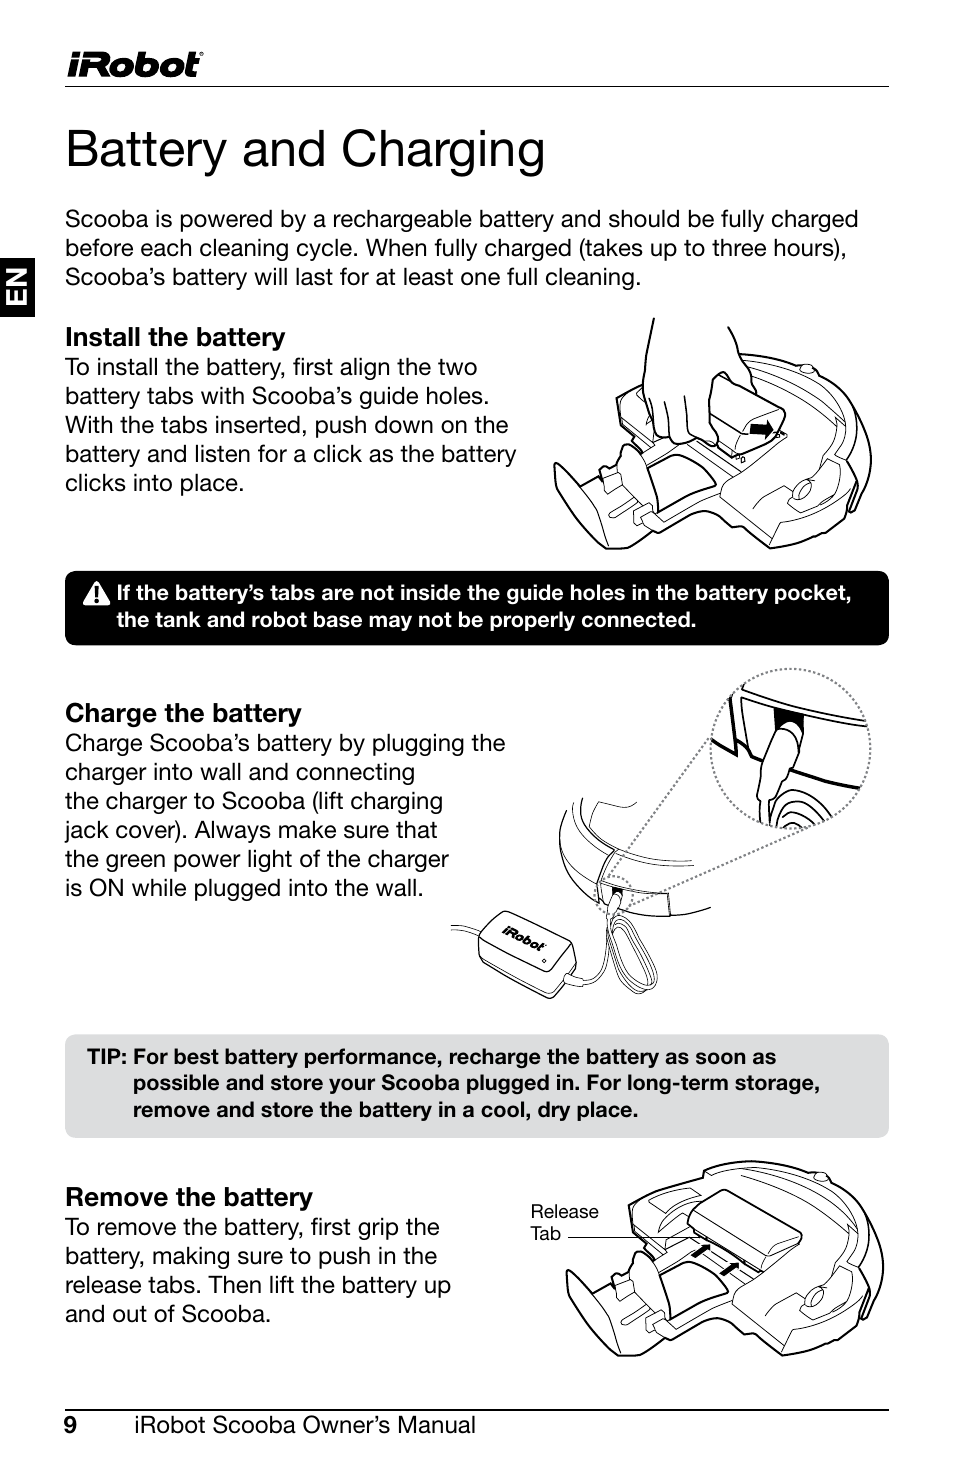 Battery and charging | iRobot Scooba 390 User Manual | Page 12 / 17